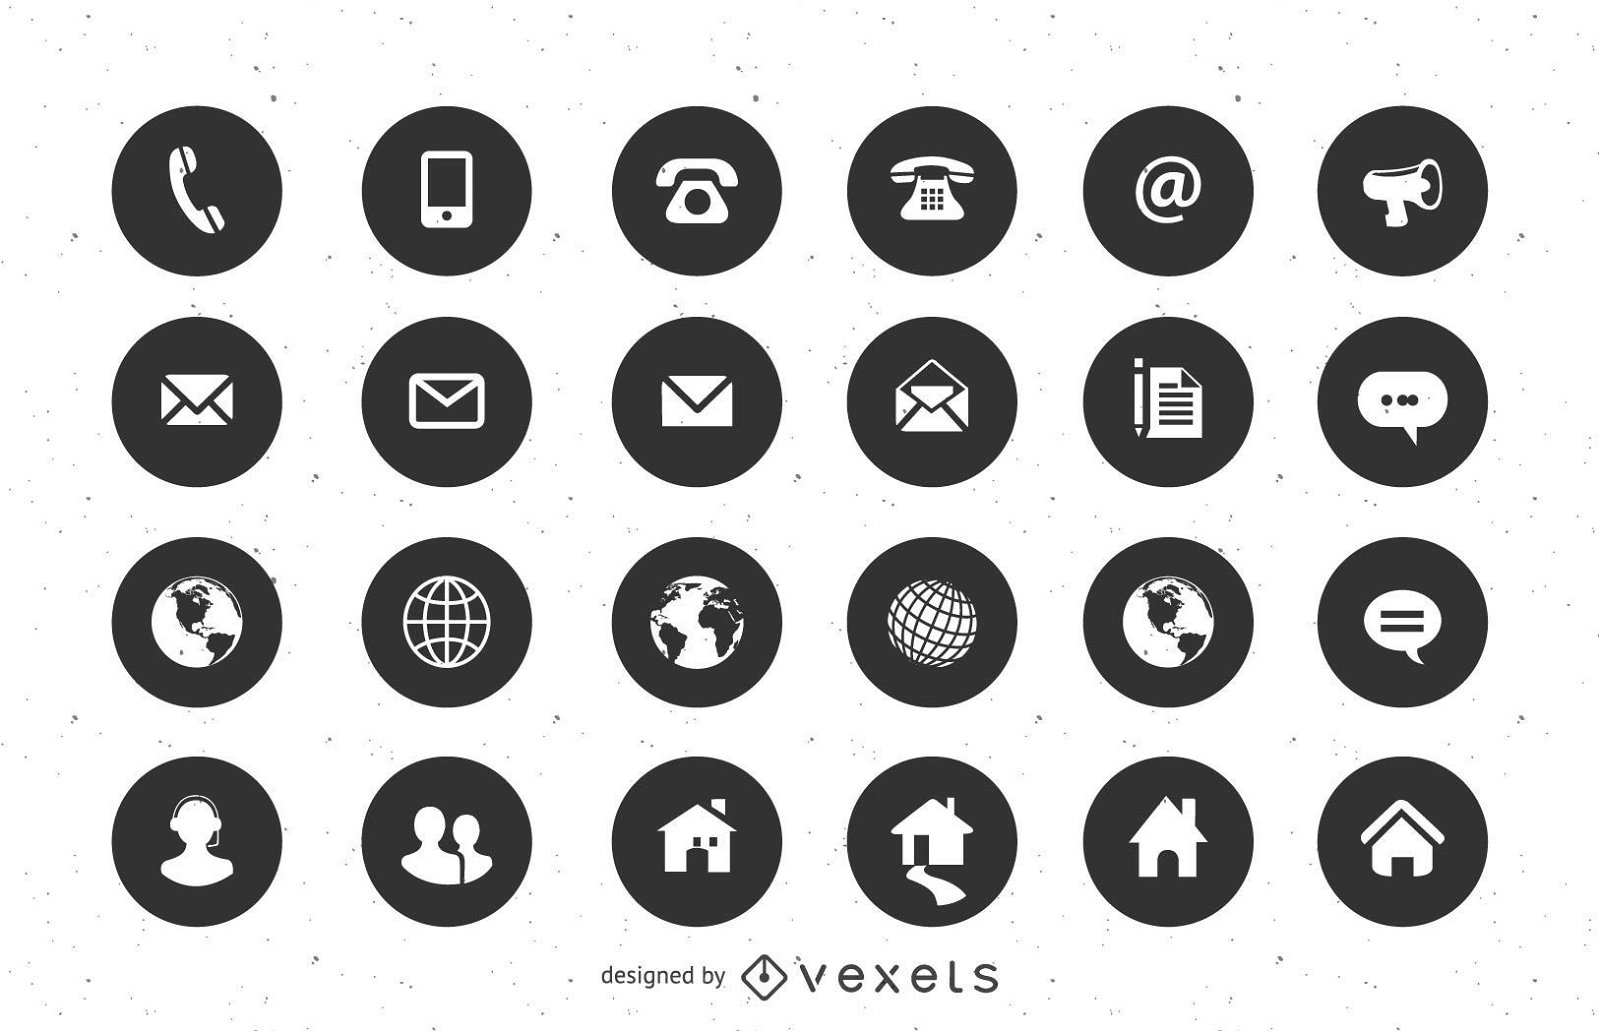 https://images.vexels.com/content/76711/preview/contact-flat-icons-161634.png